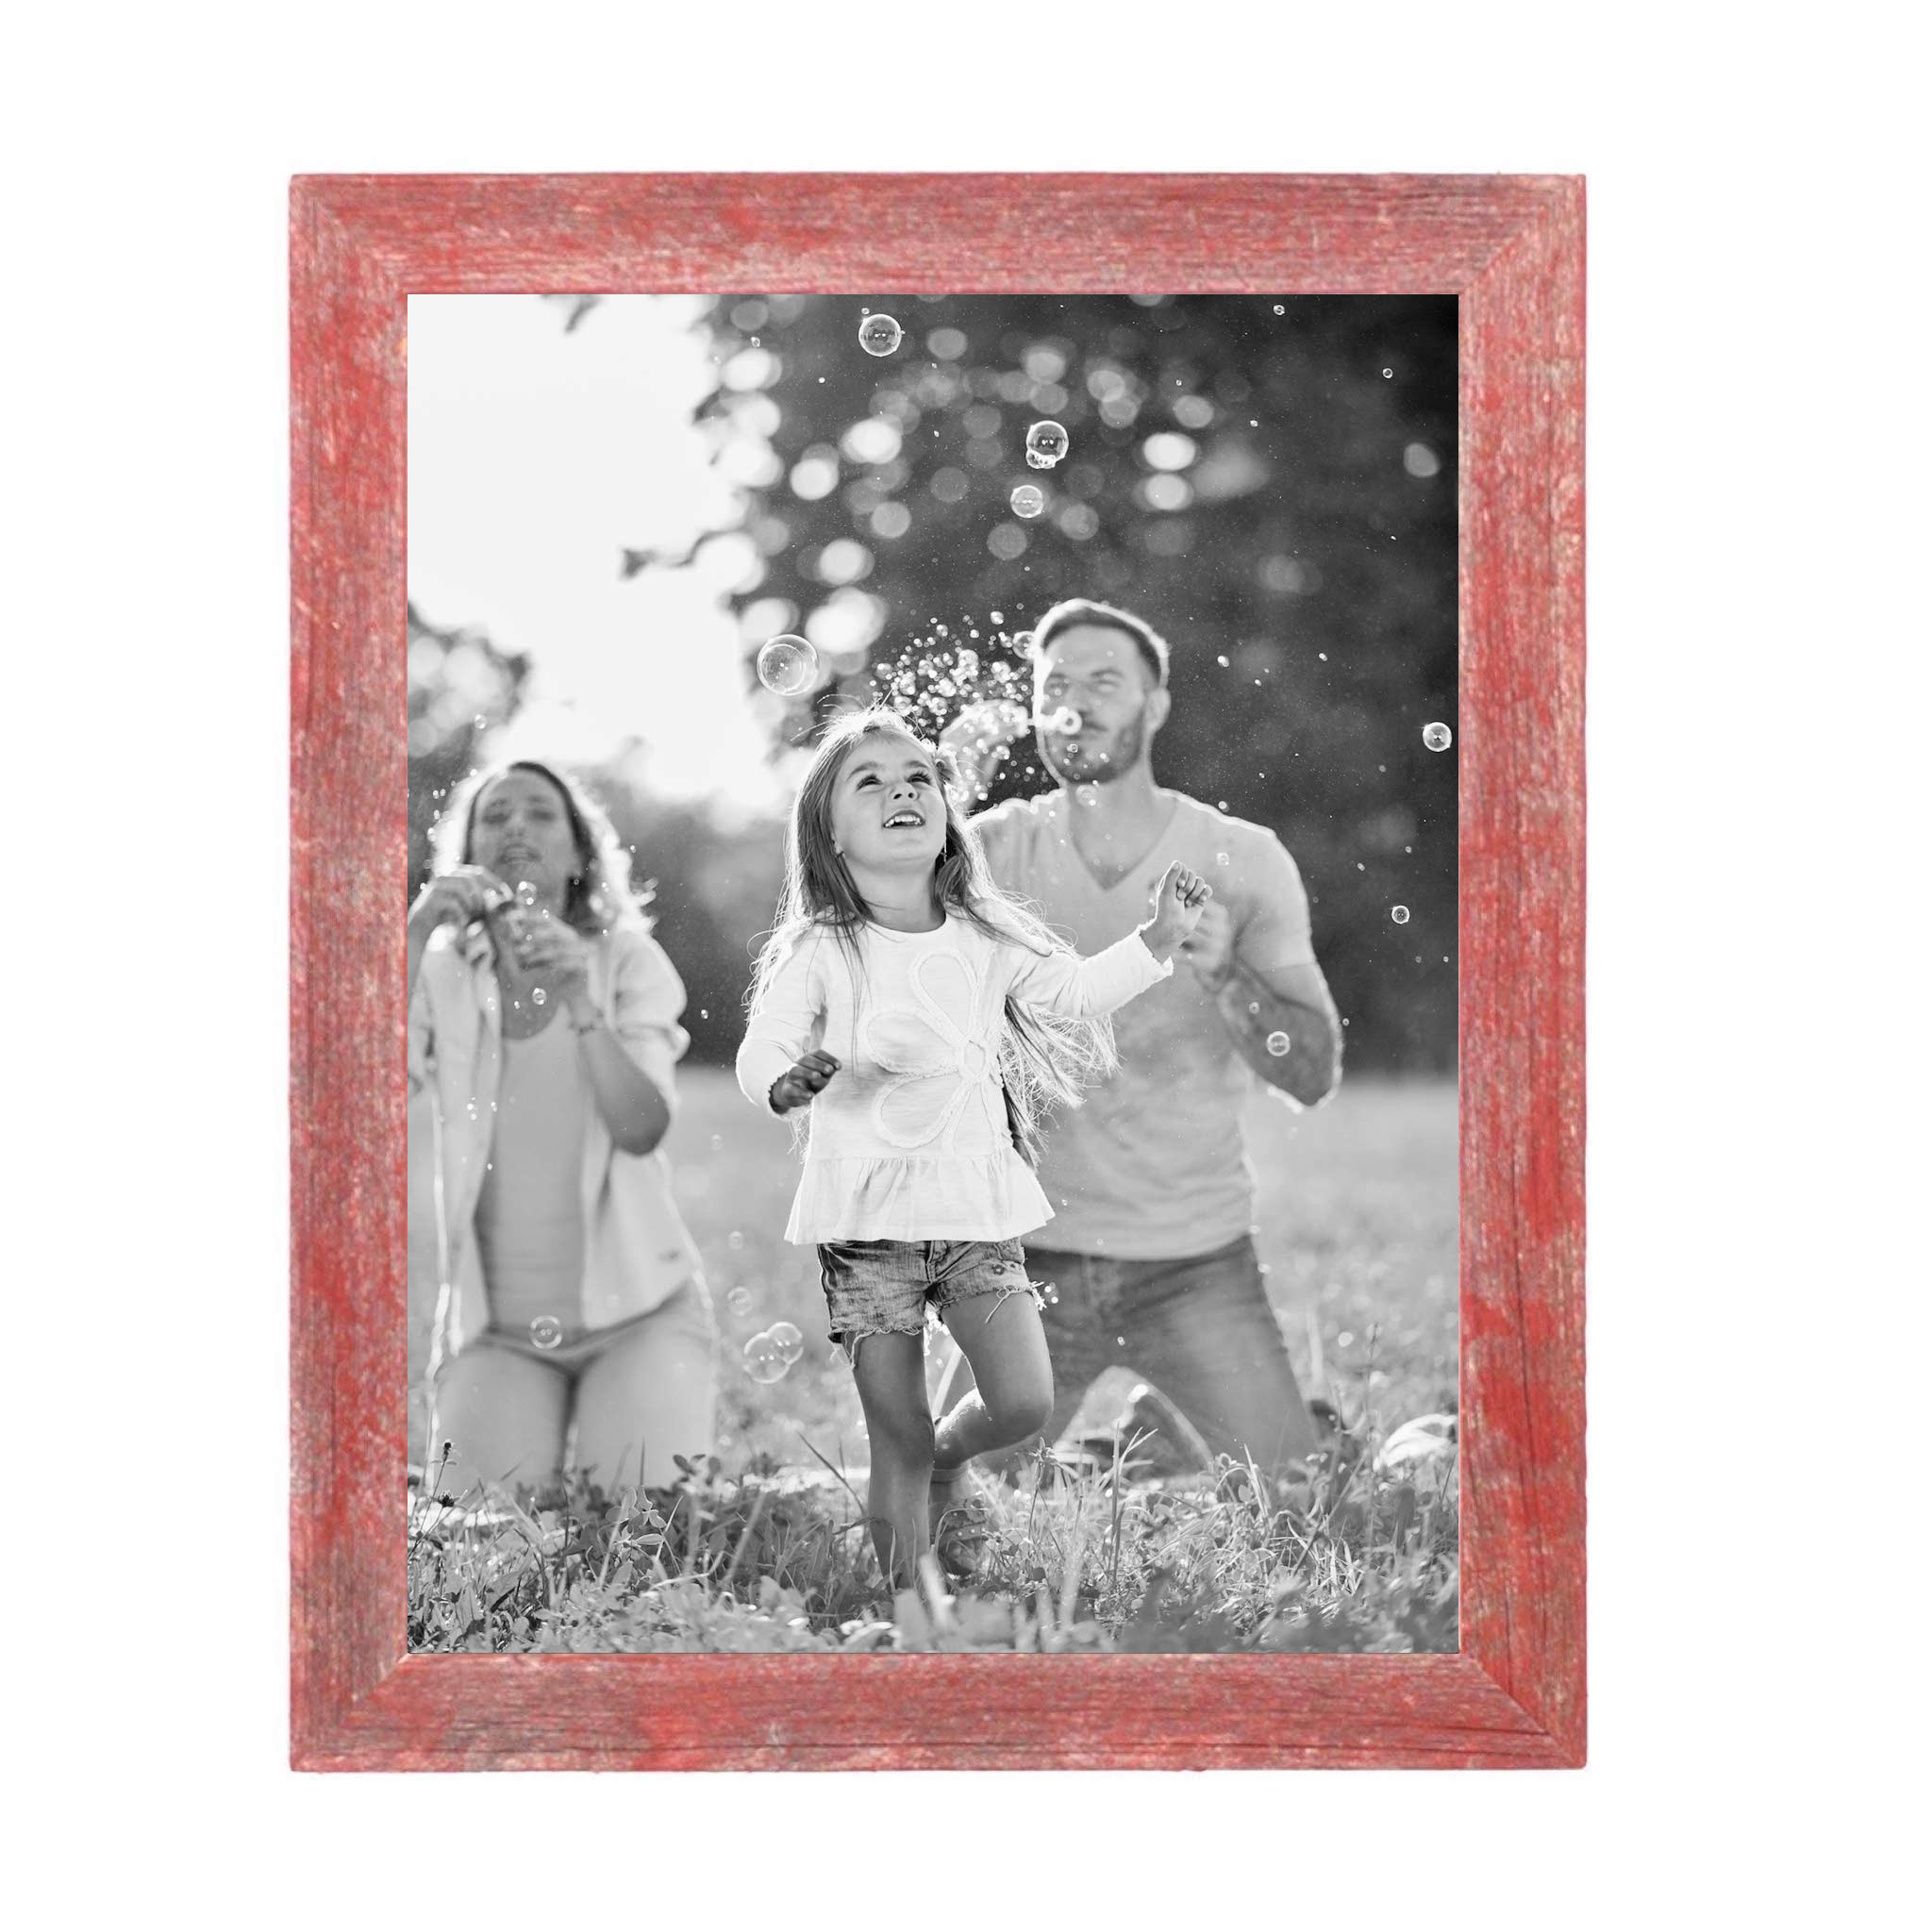 13"x19" Rustic Red Picture Frame